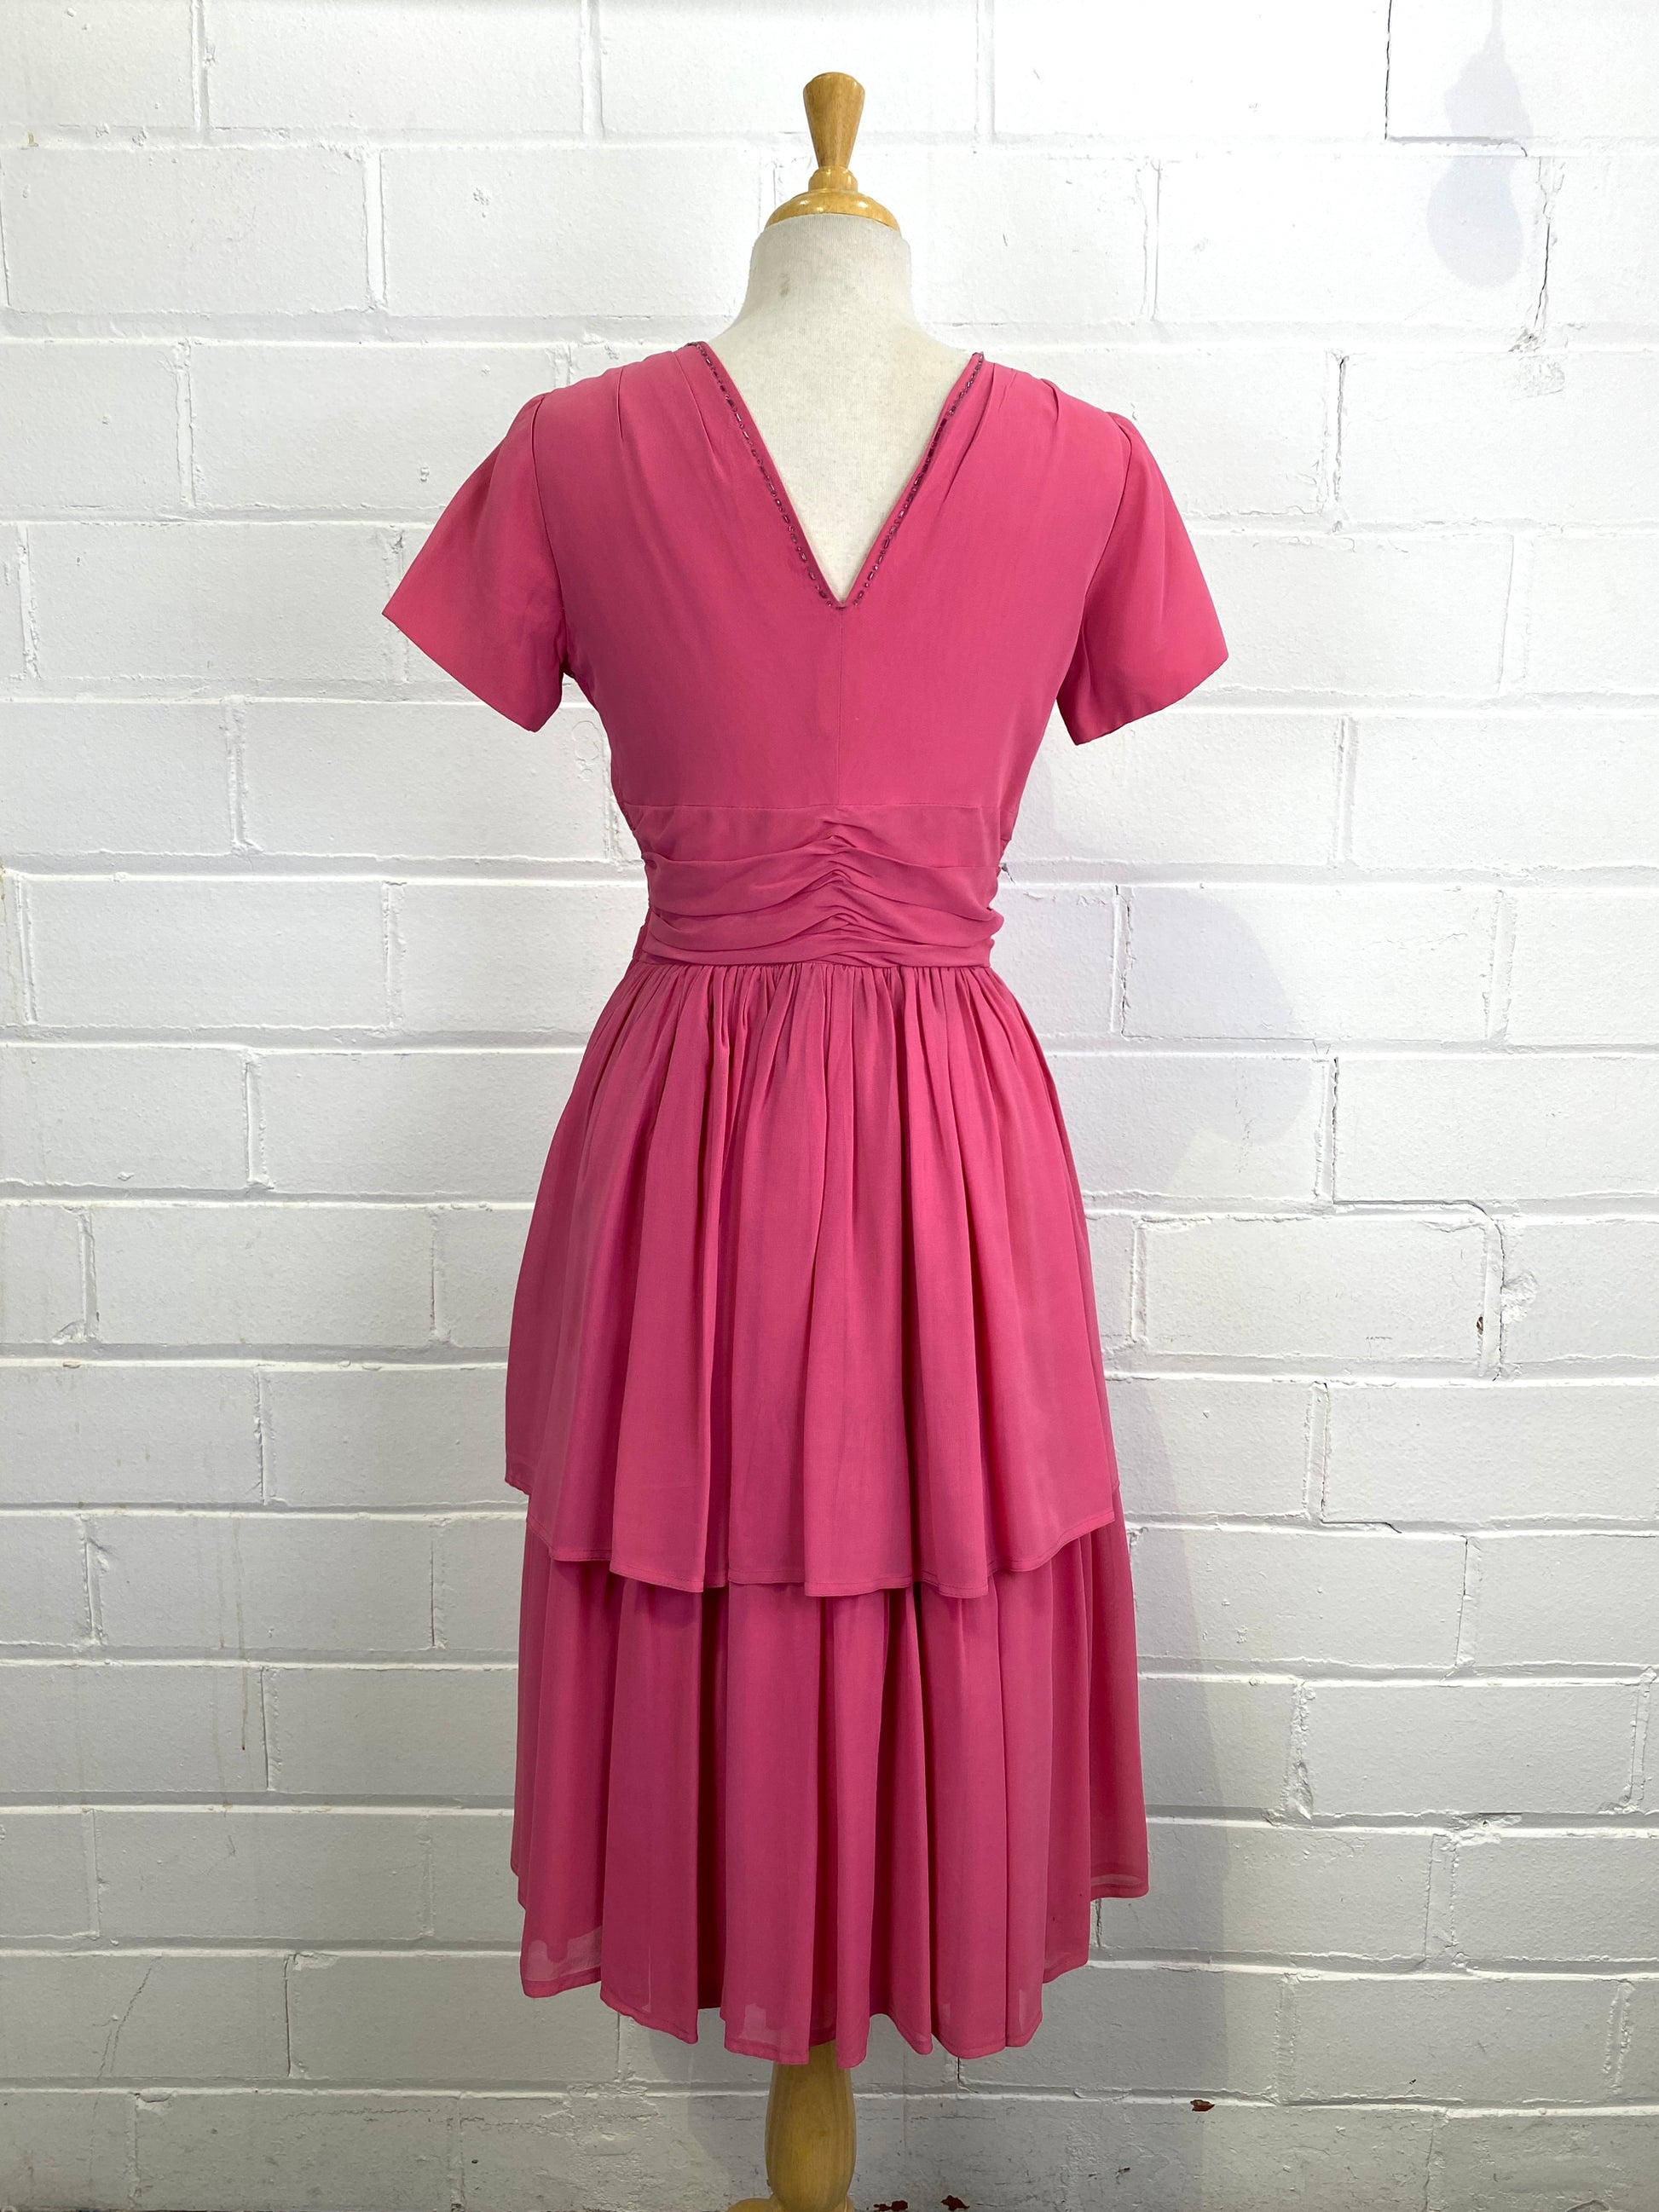 Vintage 1960s Short-Sleeve Beaded Pink Tiered Skirt  Dress, Small